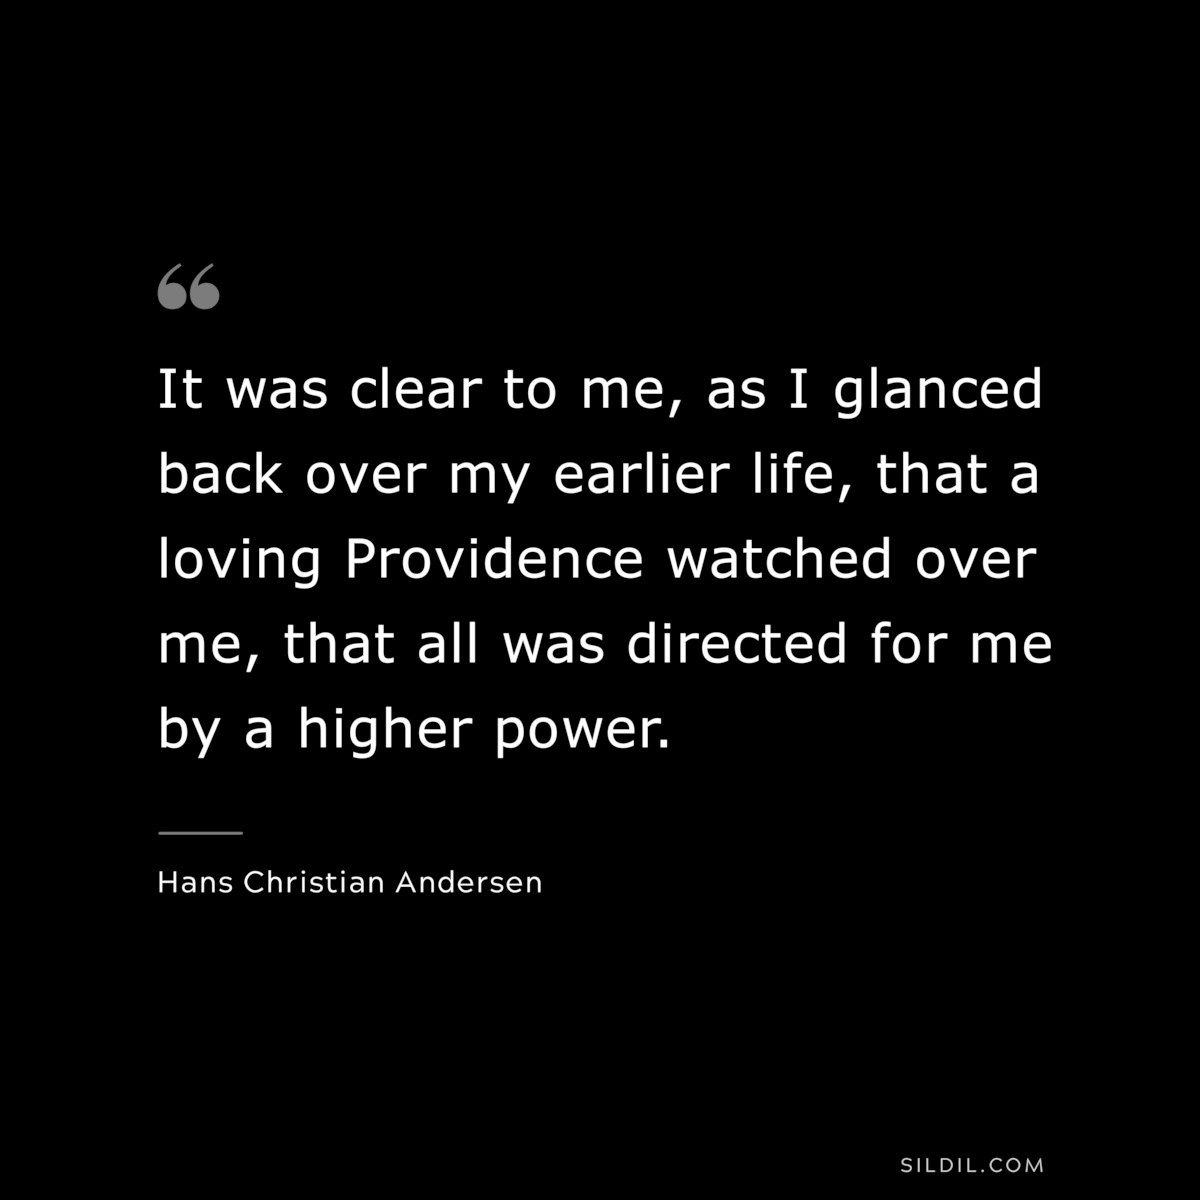 It was clear to me, as I glanced back over my earlier life, that a loving Providence watched over me, that all was directed for me by a higher power. ― Hans Christian Andersen